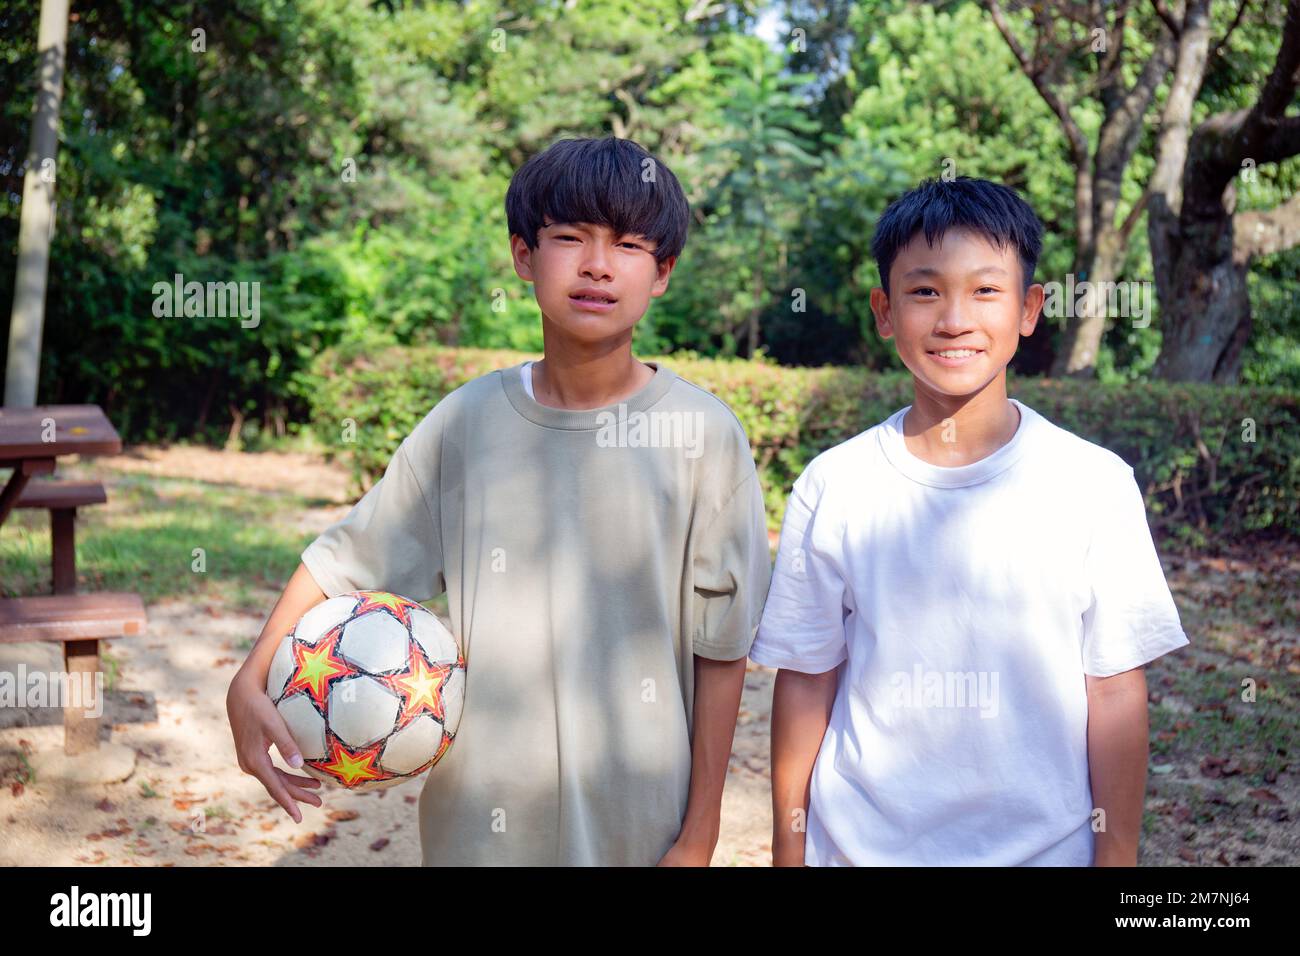 Two 13 year old boys in a park with a football in summer. Stock Photo